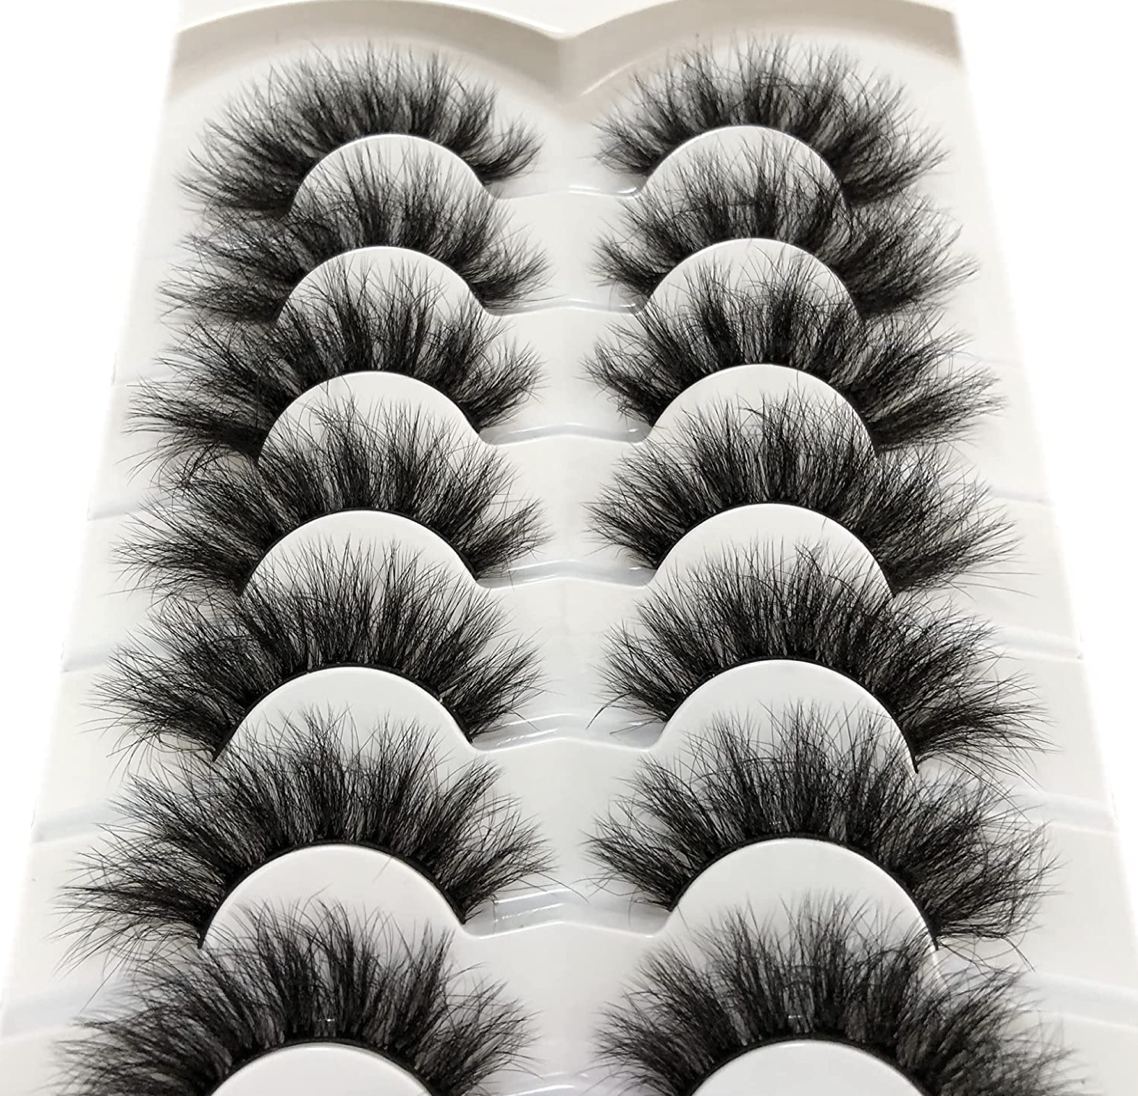 Faux Mink Lashes Long and Fluffy - 7 Pairs